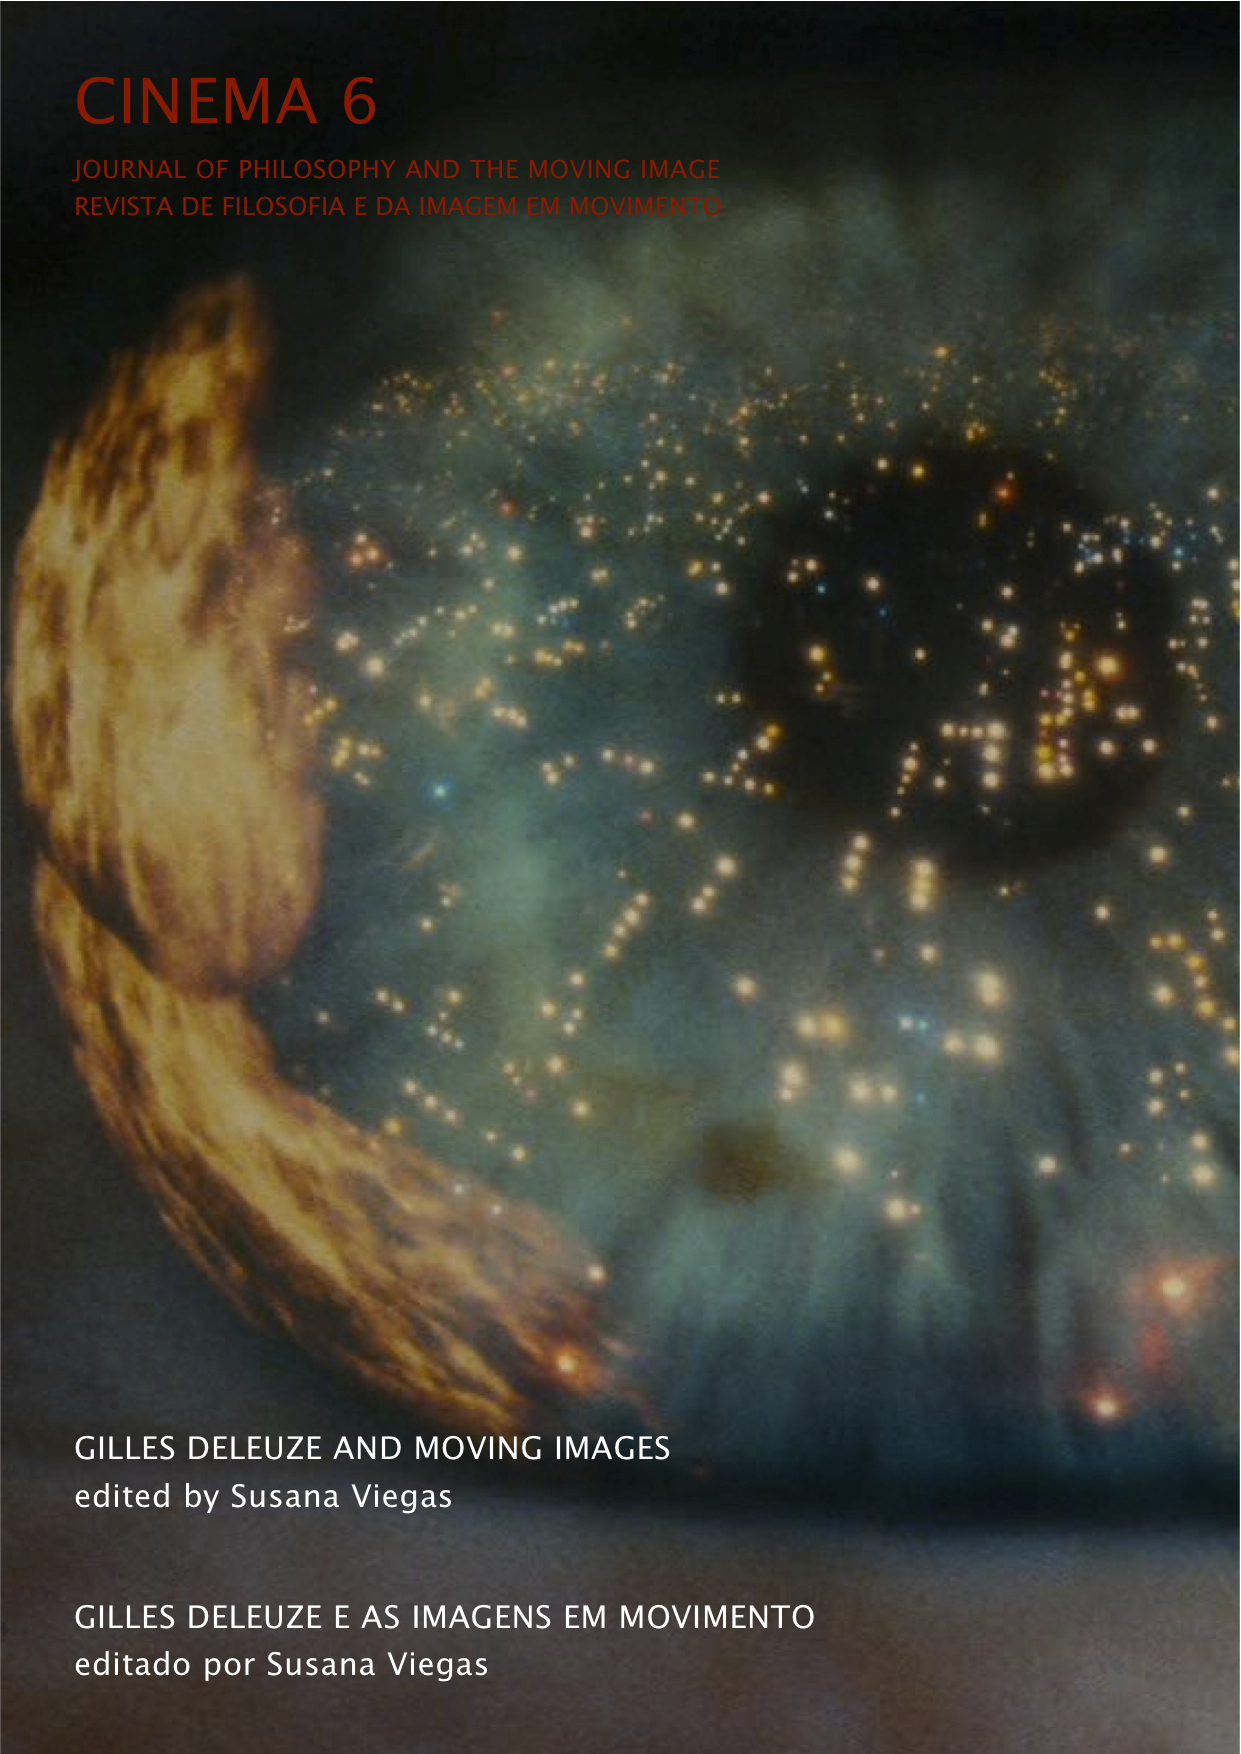 					View No. 6 (2014): Gilles Deleuze and Moving Images 
				